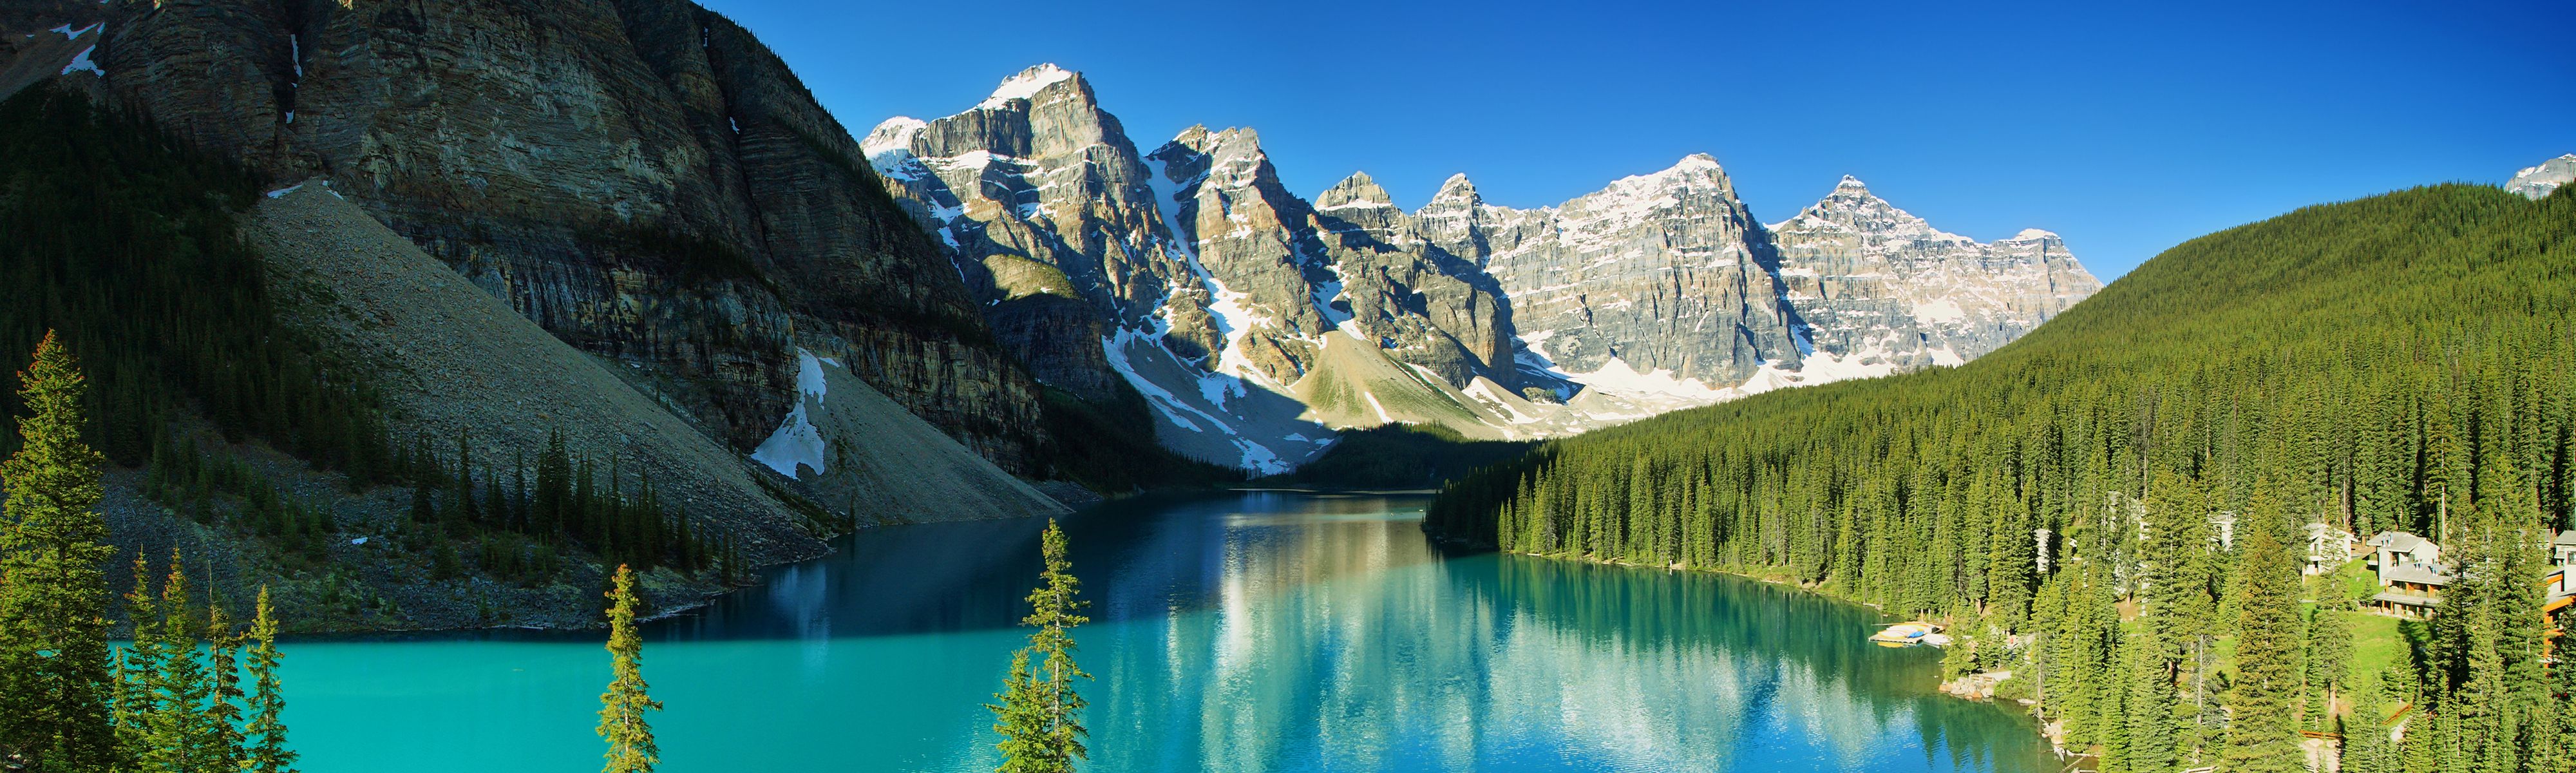 snow capped canadian rockies mountains surrounding bright teal lake and evergreen trees